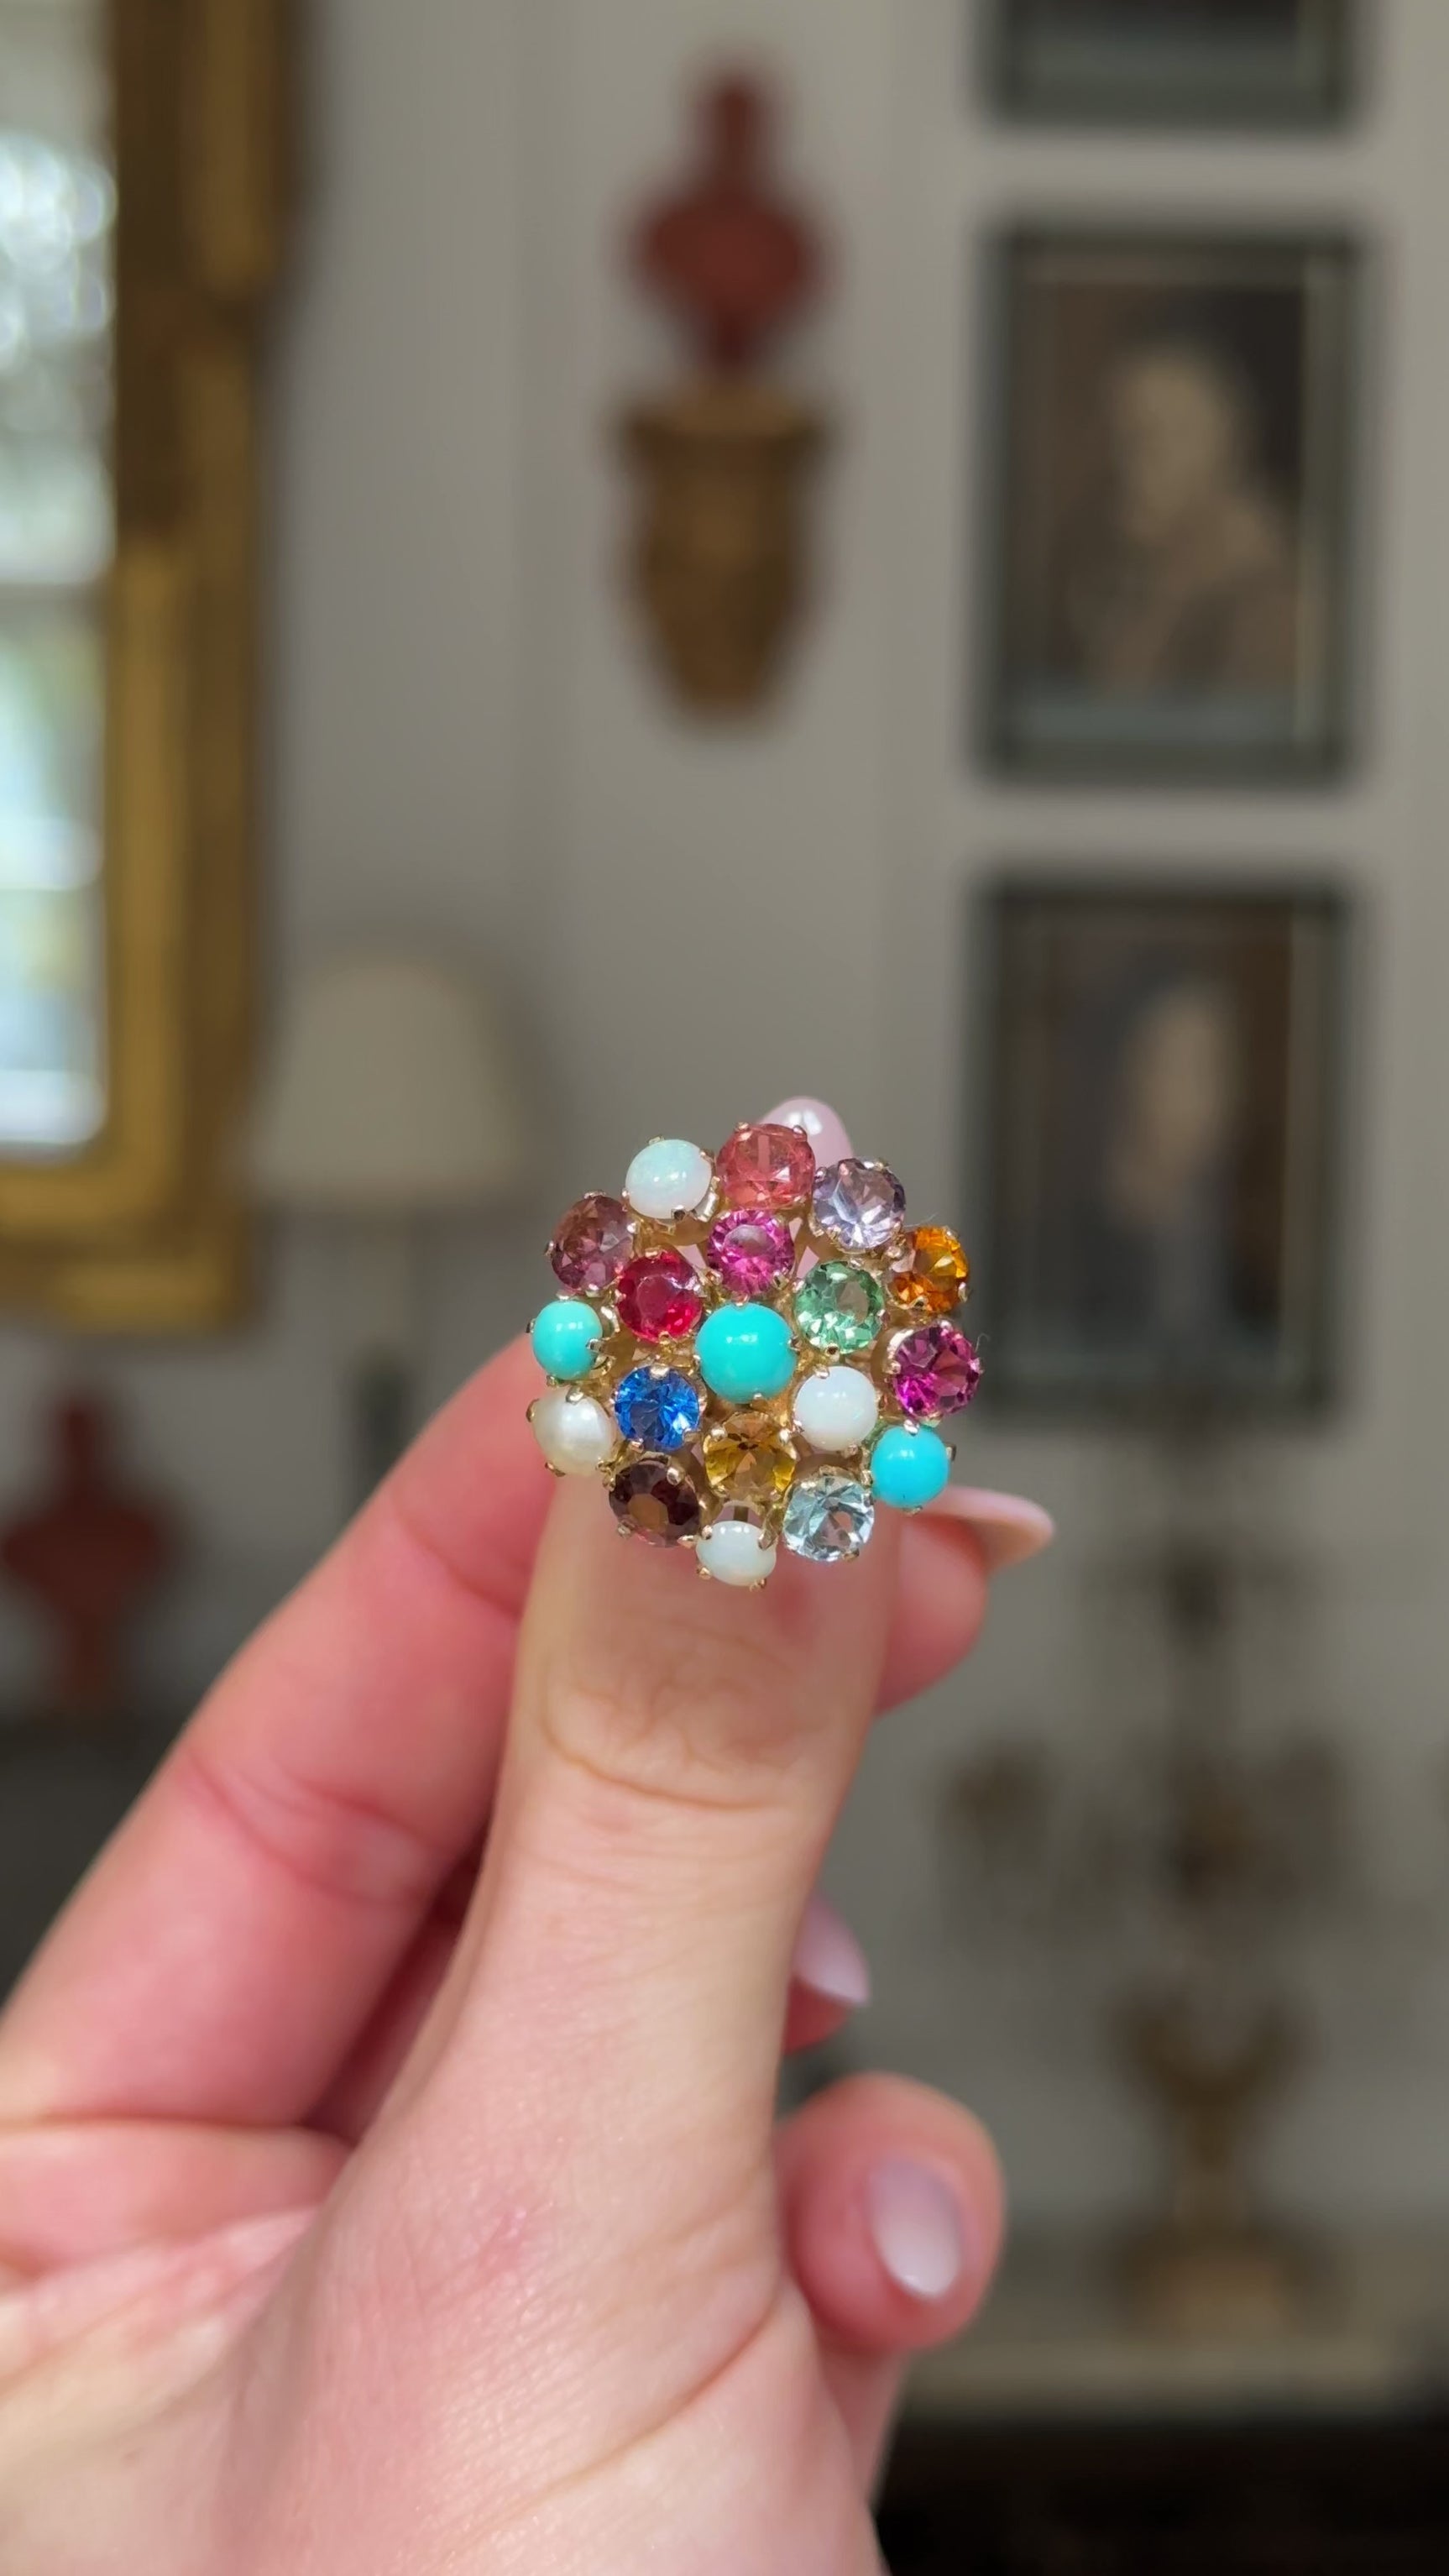 Multi gemstone cluster ring held in fingers and rotated to give full perspective, front view.